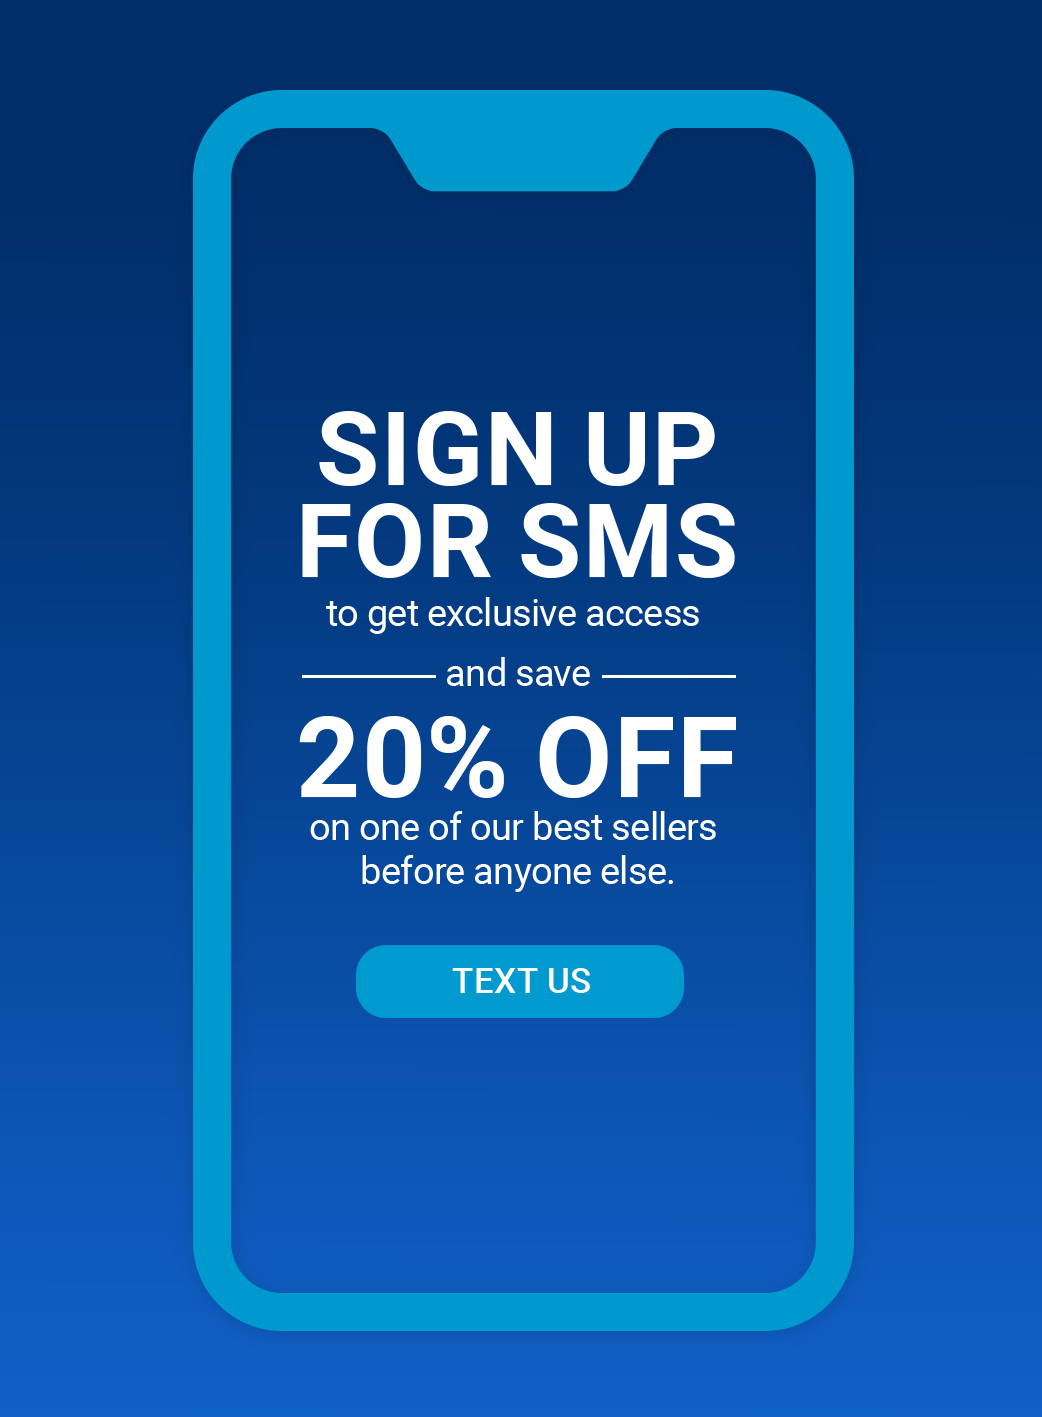 Sign up for SMS to get exclusive access and save 20% off on one of our best sellers before anyone else. [TEXT US]